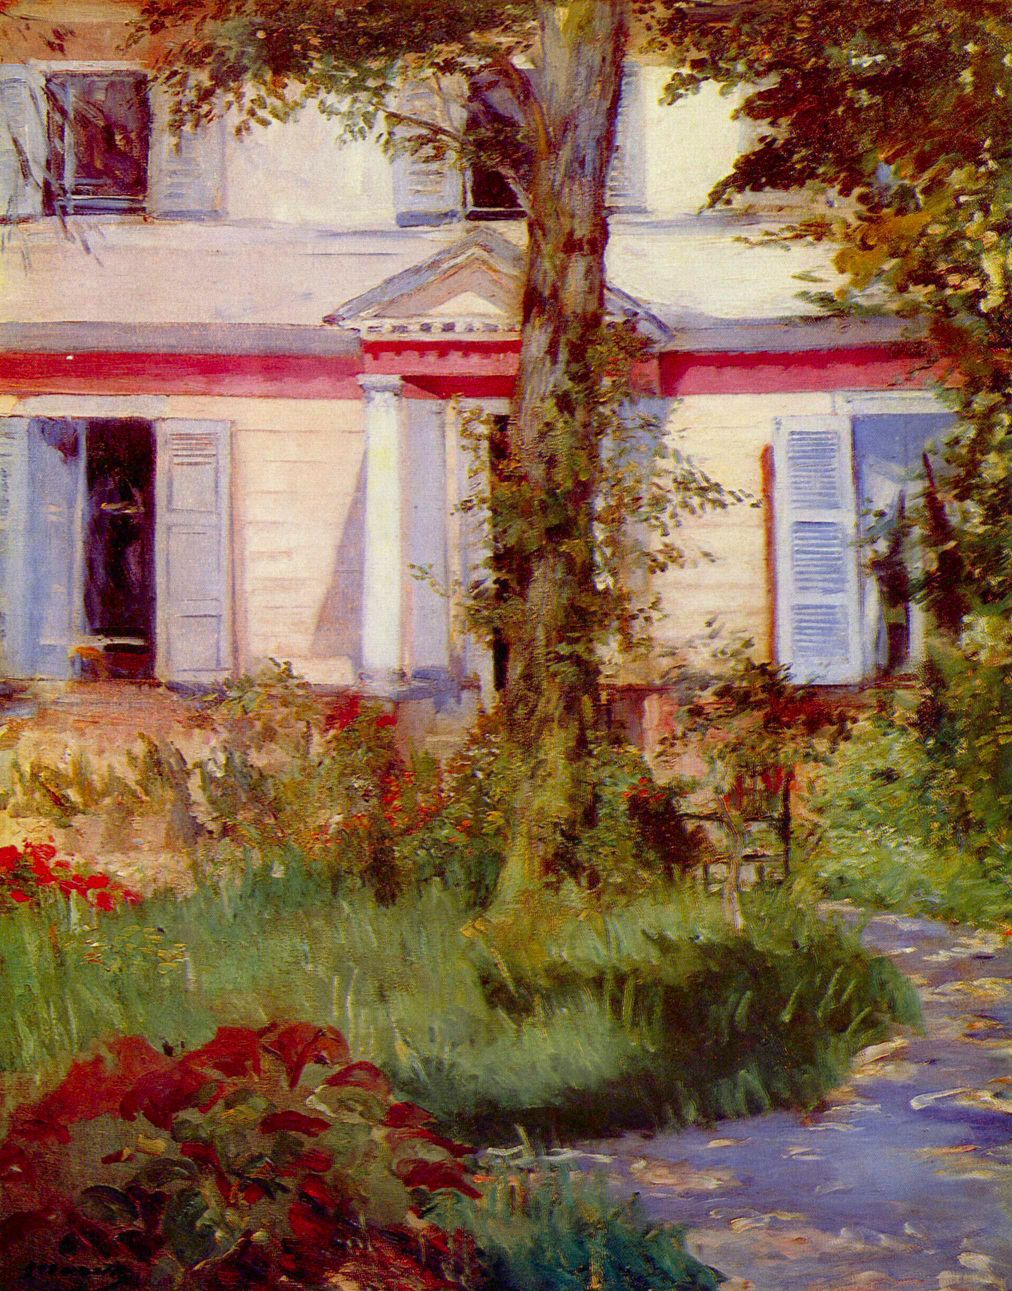 Édouard Manet - House in Rueil by Edouard Manet